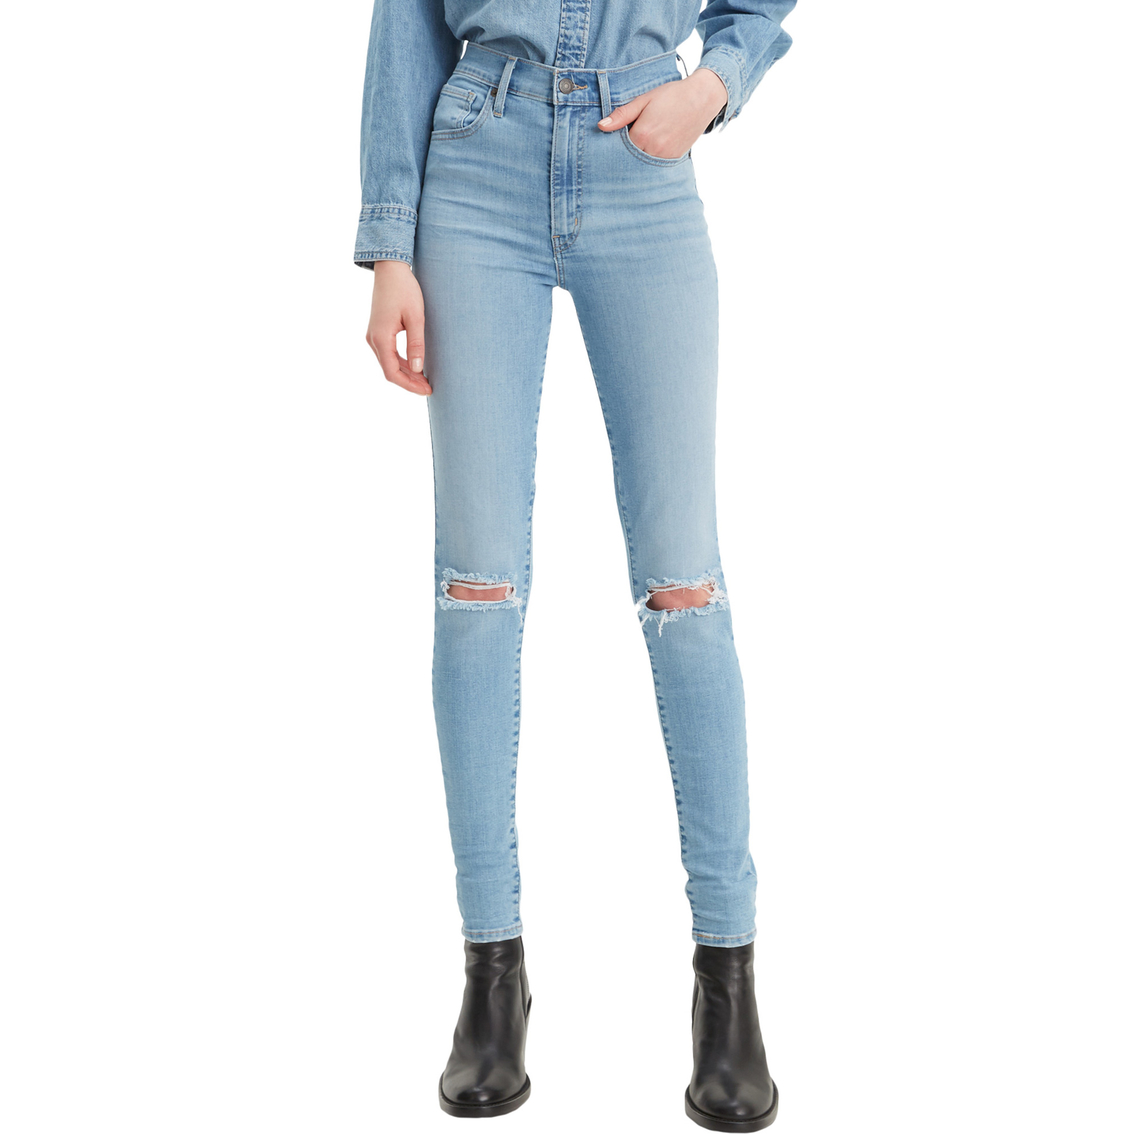 Levi's Mile High Super Skinny Jeans | Jeans | Clothing & Accessories ...